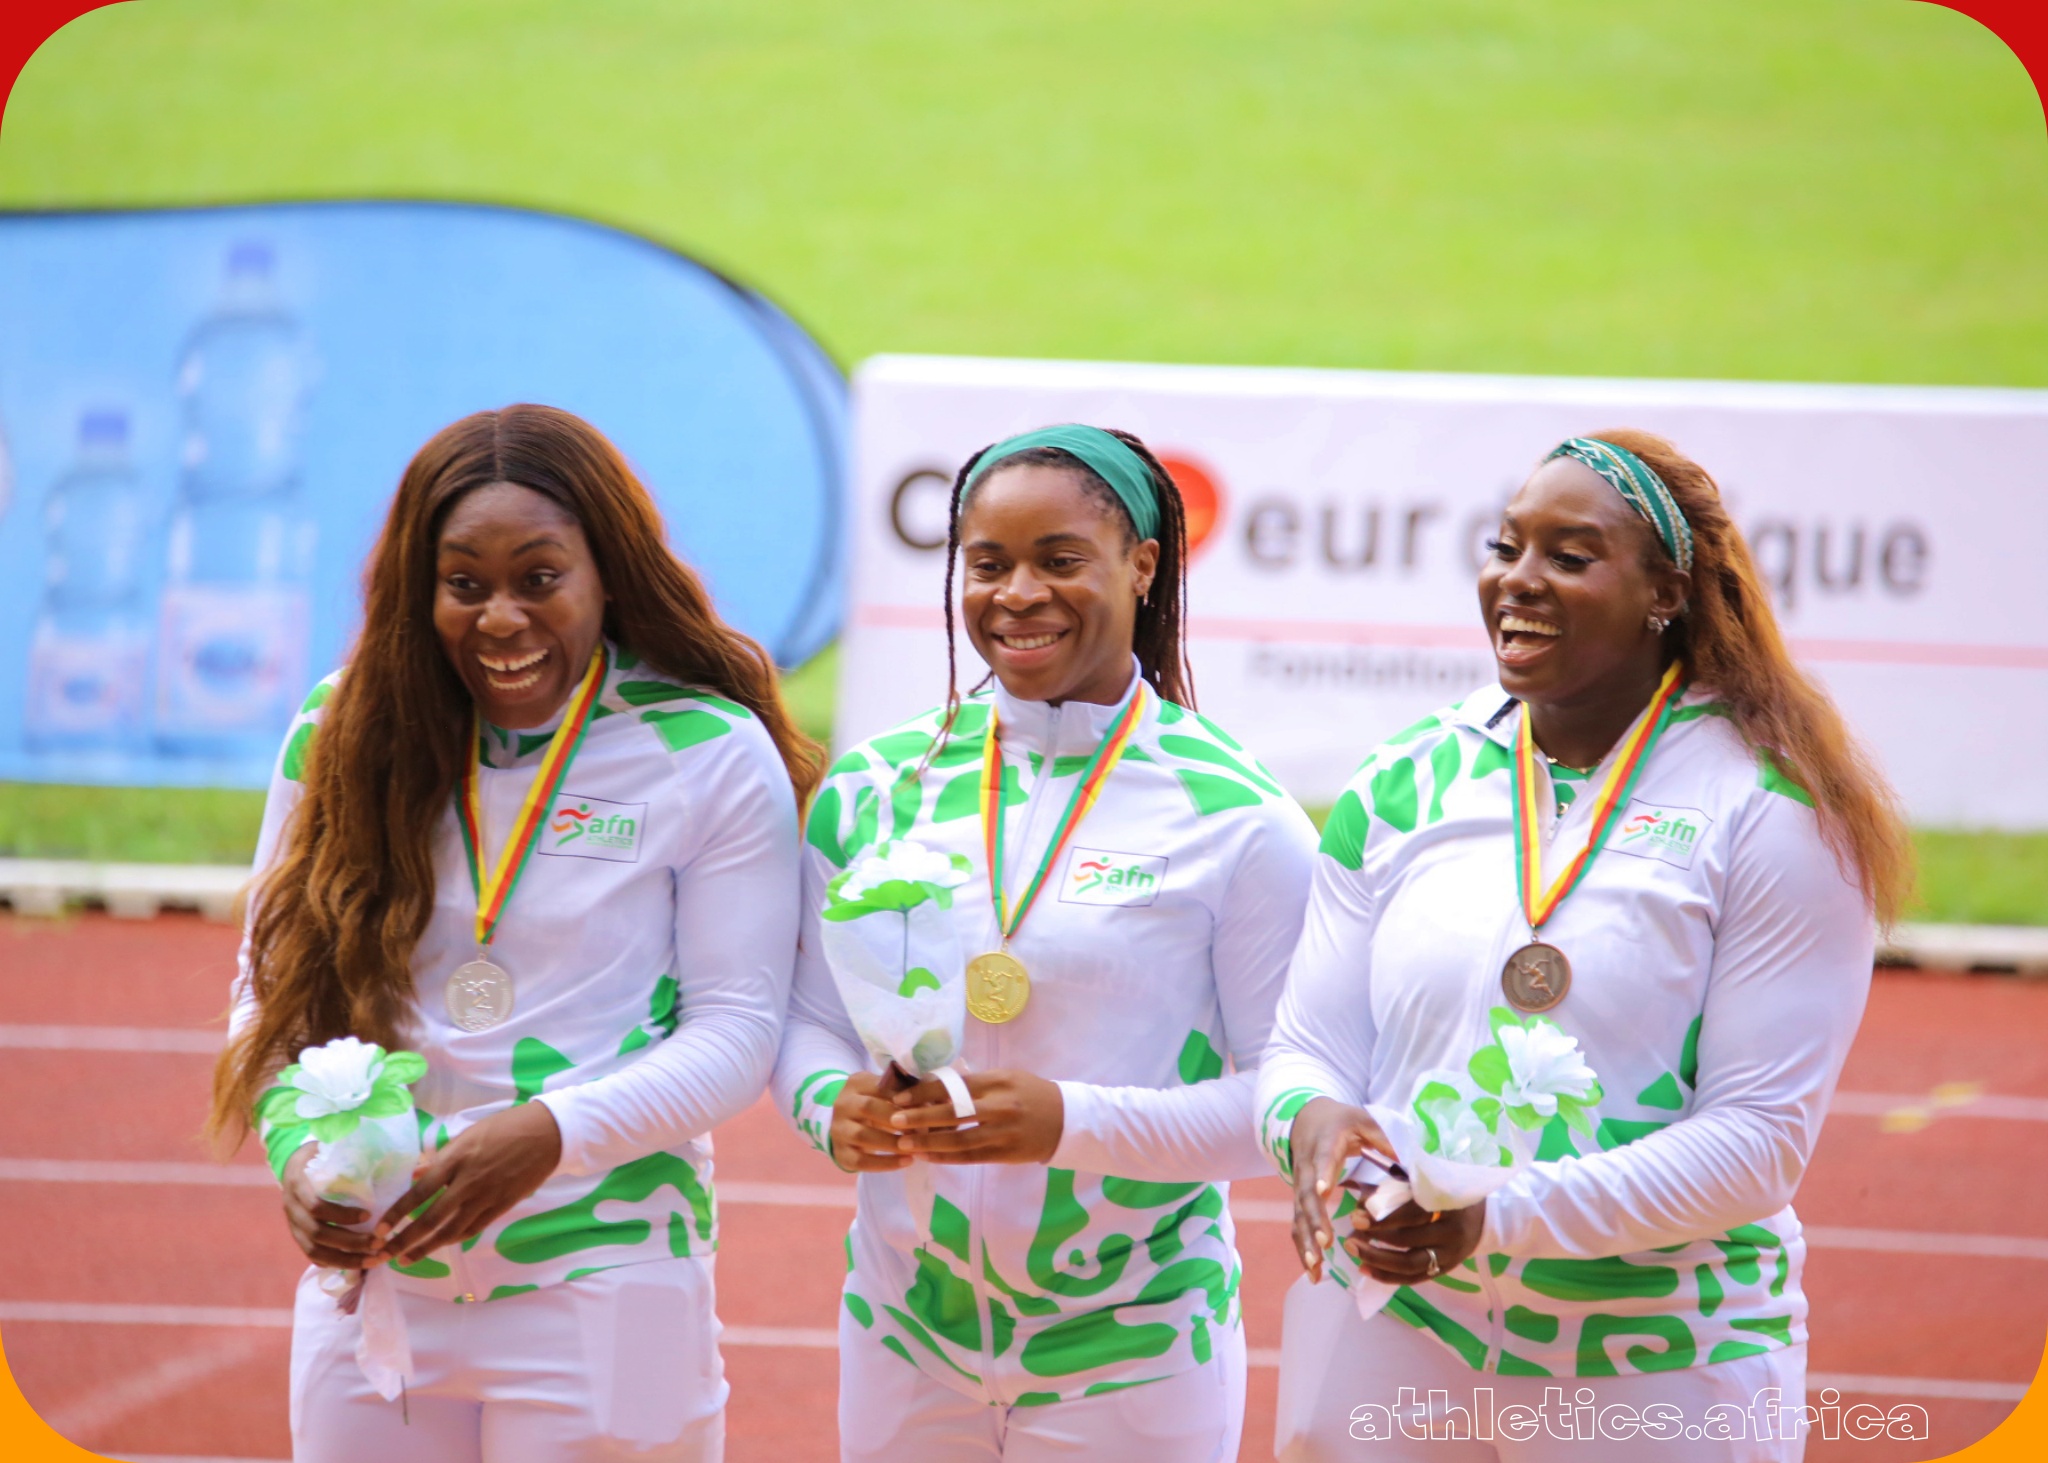 Nigerian women, Ashley Anumba (centre), Obiageri Amaechi and Chioma Onyekwere receiving the women’s discus throw medals at the 23rd CAA African Athletics Championships Douala 24 / Photo: Neto Oluwasegun